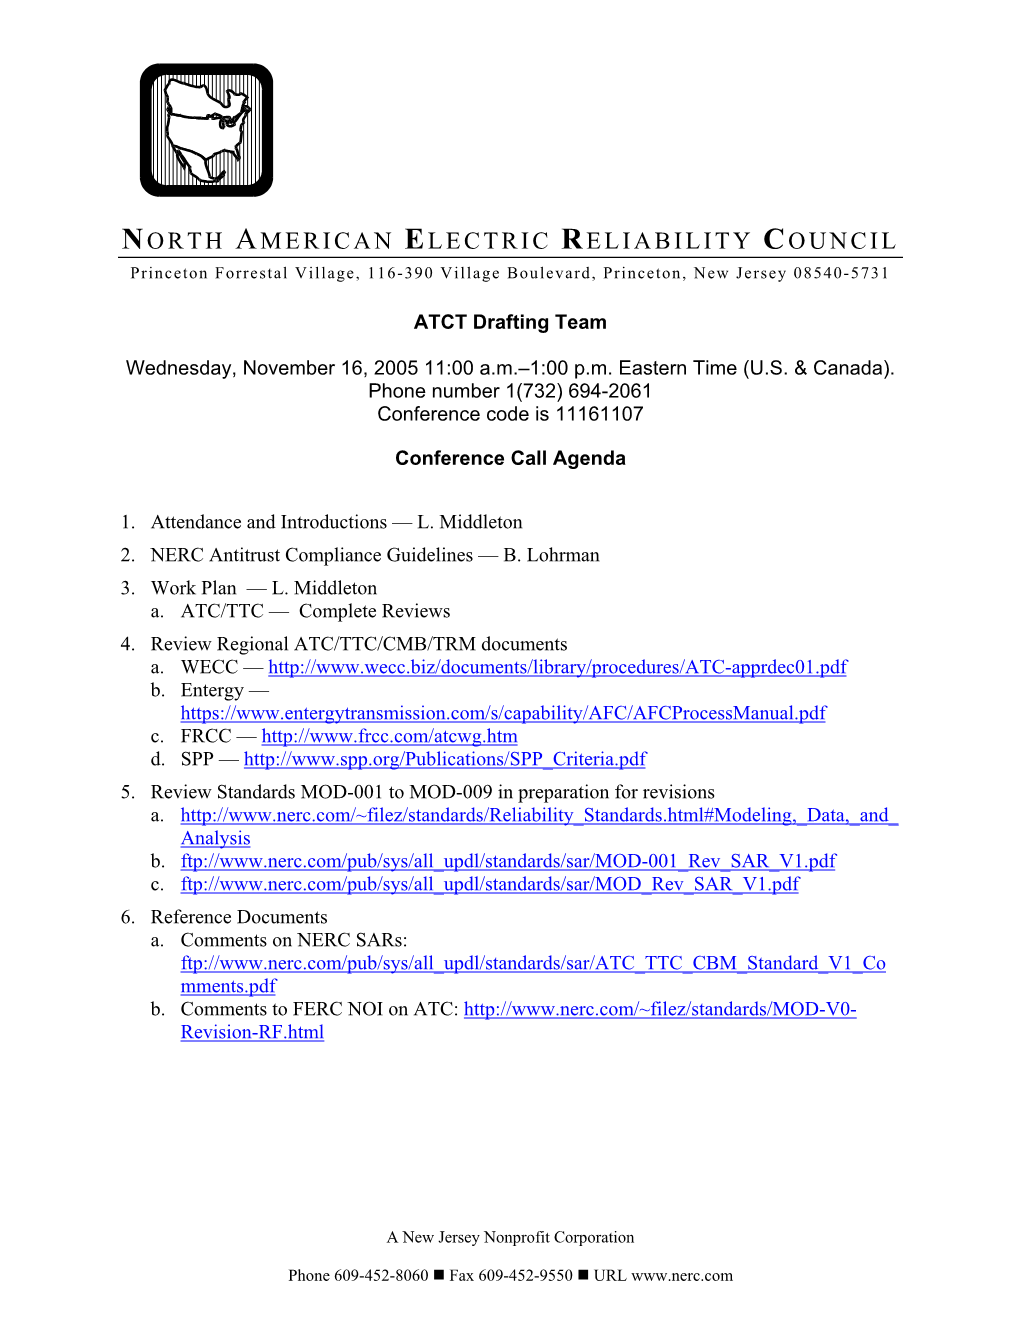 North American Electric Reliability Council (NERC), Planning Standards I.E.1